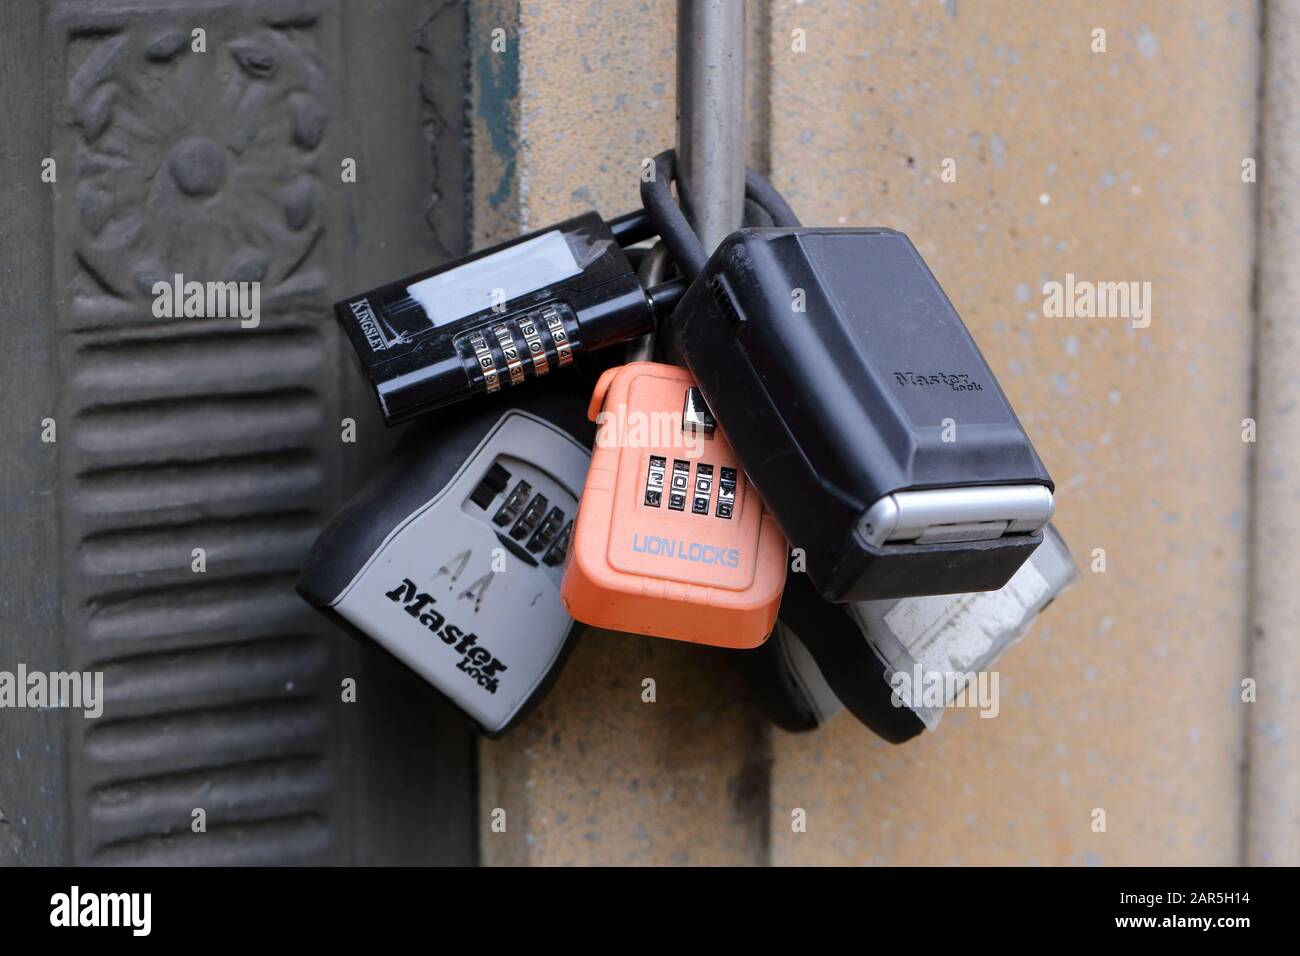 A myriad of couch surfing, and pet sitter lock boxes locked to a pole Stock Photo